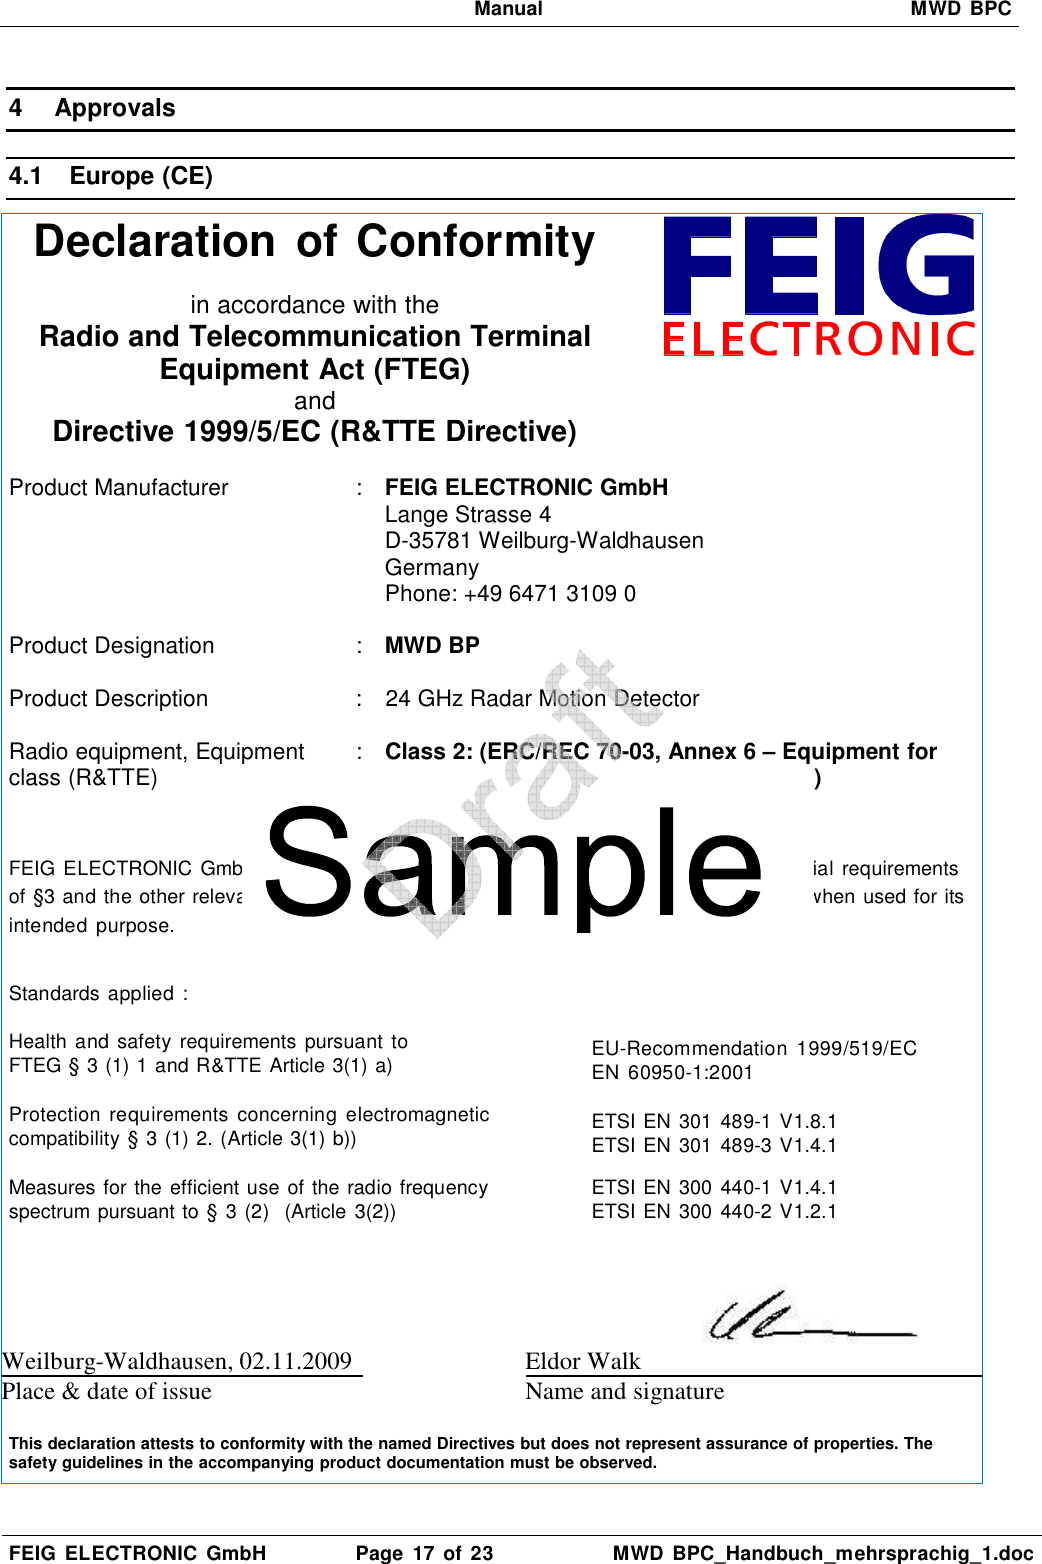   Manual  MWD BPC  FEIG  ELECTRONIC  GmbH  Page  17  of 23  MWD  BPC_Handbuch_mehrsprachig_1.doc  4  Approvals 4.1  Europe (CE) Declaration of Conformity   in accordance with the Radio and Telecommunication Terminal Equipment Act (FTEG) and Directive 1999/5/EC (R&amp;TTE Directive)   Product Manufacturer   :  FEIG ELECTRONIC GmbH Lange Strasse 4 D-35781 Weilburg-Waldhausen Germany Phone: +49 6471 3109 0  Product Designation  : MWD BP   Product Description  :  24 GHz Radar Motion Detector  Radio equipment, Equipment class (R&amp;TTE)  :  Class 2: (ERC/REC 70-03, Annex 6 – Equipment for      Detecting Movement and Alert)     FEIG ELECTRONIC  GmbH declares  that  the  radio  equipment  complies with  the  essential requirements of §3 and the other relevant provisions of the FTEG (Article 3 of the R&amp;TTE Directive), when used for its intended  purpose.  Standards applied : Health and  safety  requirements pursuant  to FTEG § 3 (1) 1 and R&amp;TTE Article 3(1) a)   EU-Recommendation  1999/519/EC EN  60950-1:2001 Protection  requirements  concerning  electromagnetic compatibility § 3 (1) 2. (Article 3(1) b))   ETSI EN 301 489-1 V1.8.1 ETSI EN 301 489-3 V1.4.1 Measures for the efficient use of the radio frequency spectrum pursuant to § 3 (2)  (Article 3(2))   ETSI EN 300 440-1 V1.4.1 ETSI EN 300 440-2 V1.2.1  Weilburg-Waldhausen, 02.11.2009  Eldor Walk   Place &amp; date of issue Name and signature   This declaration attests to conformity with the named Directives but does not represent assurance of properties. The safety guidelines in the accompanying product documentation must be observed.  